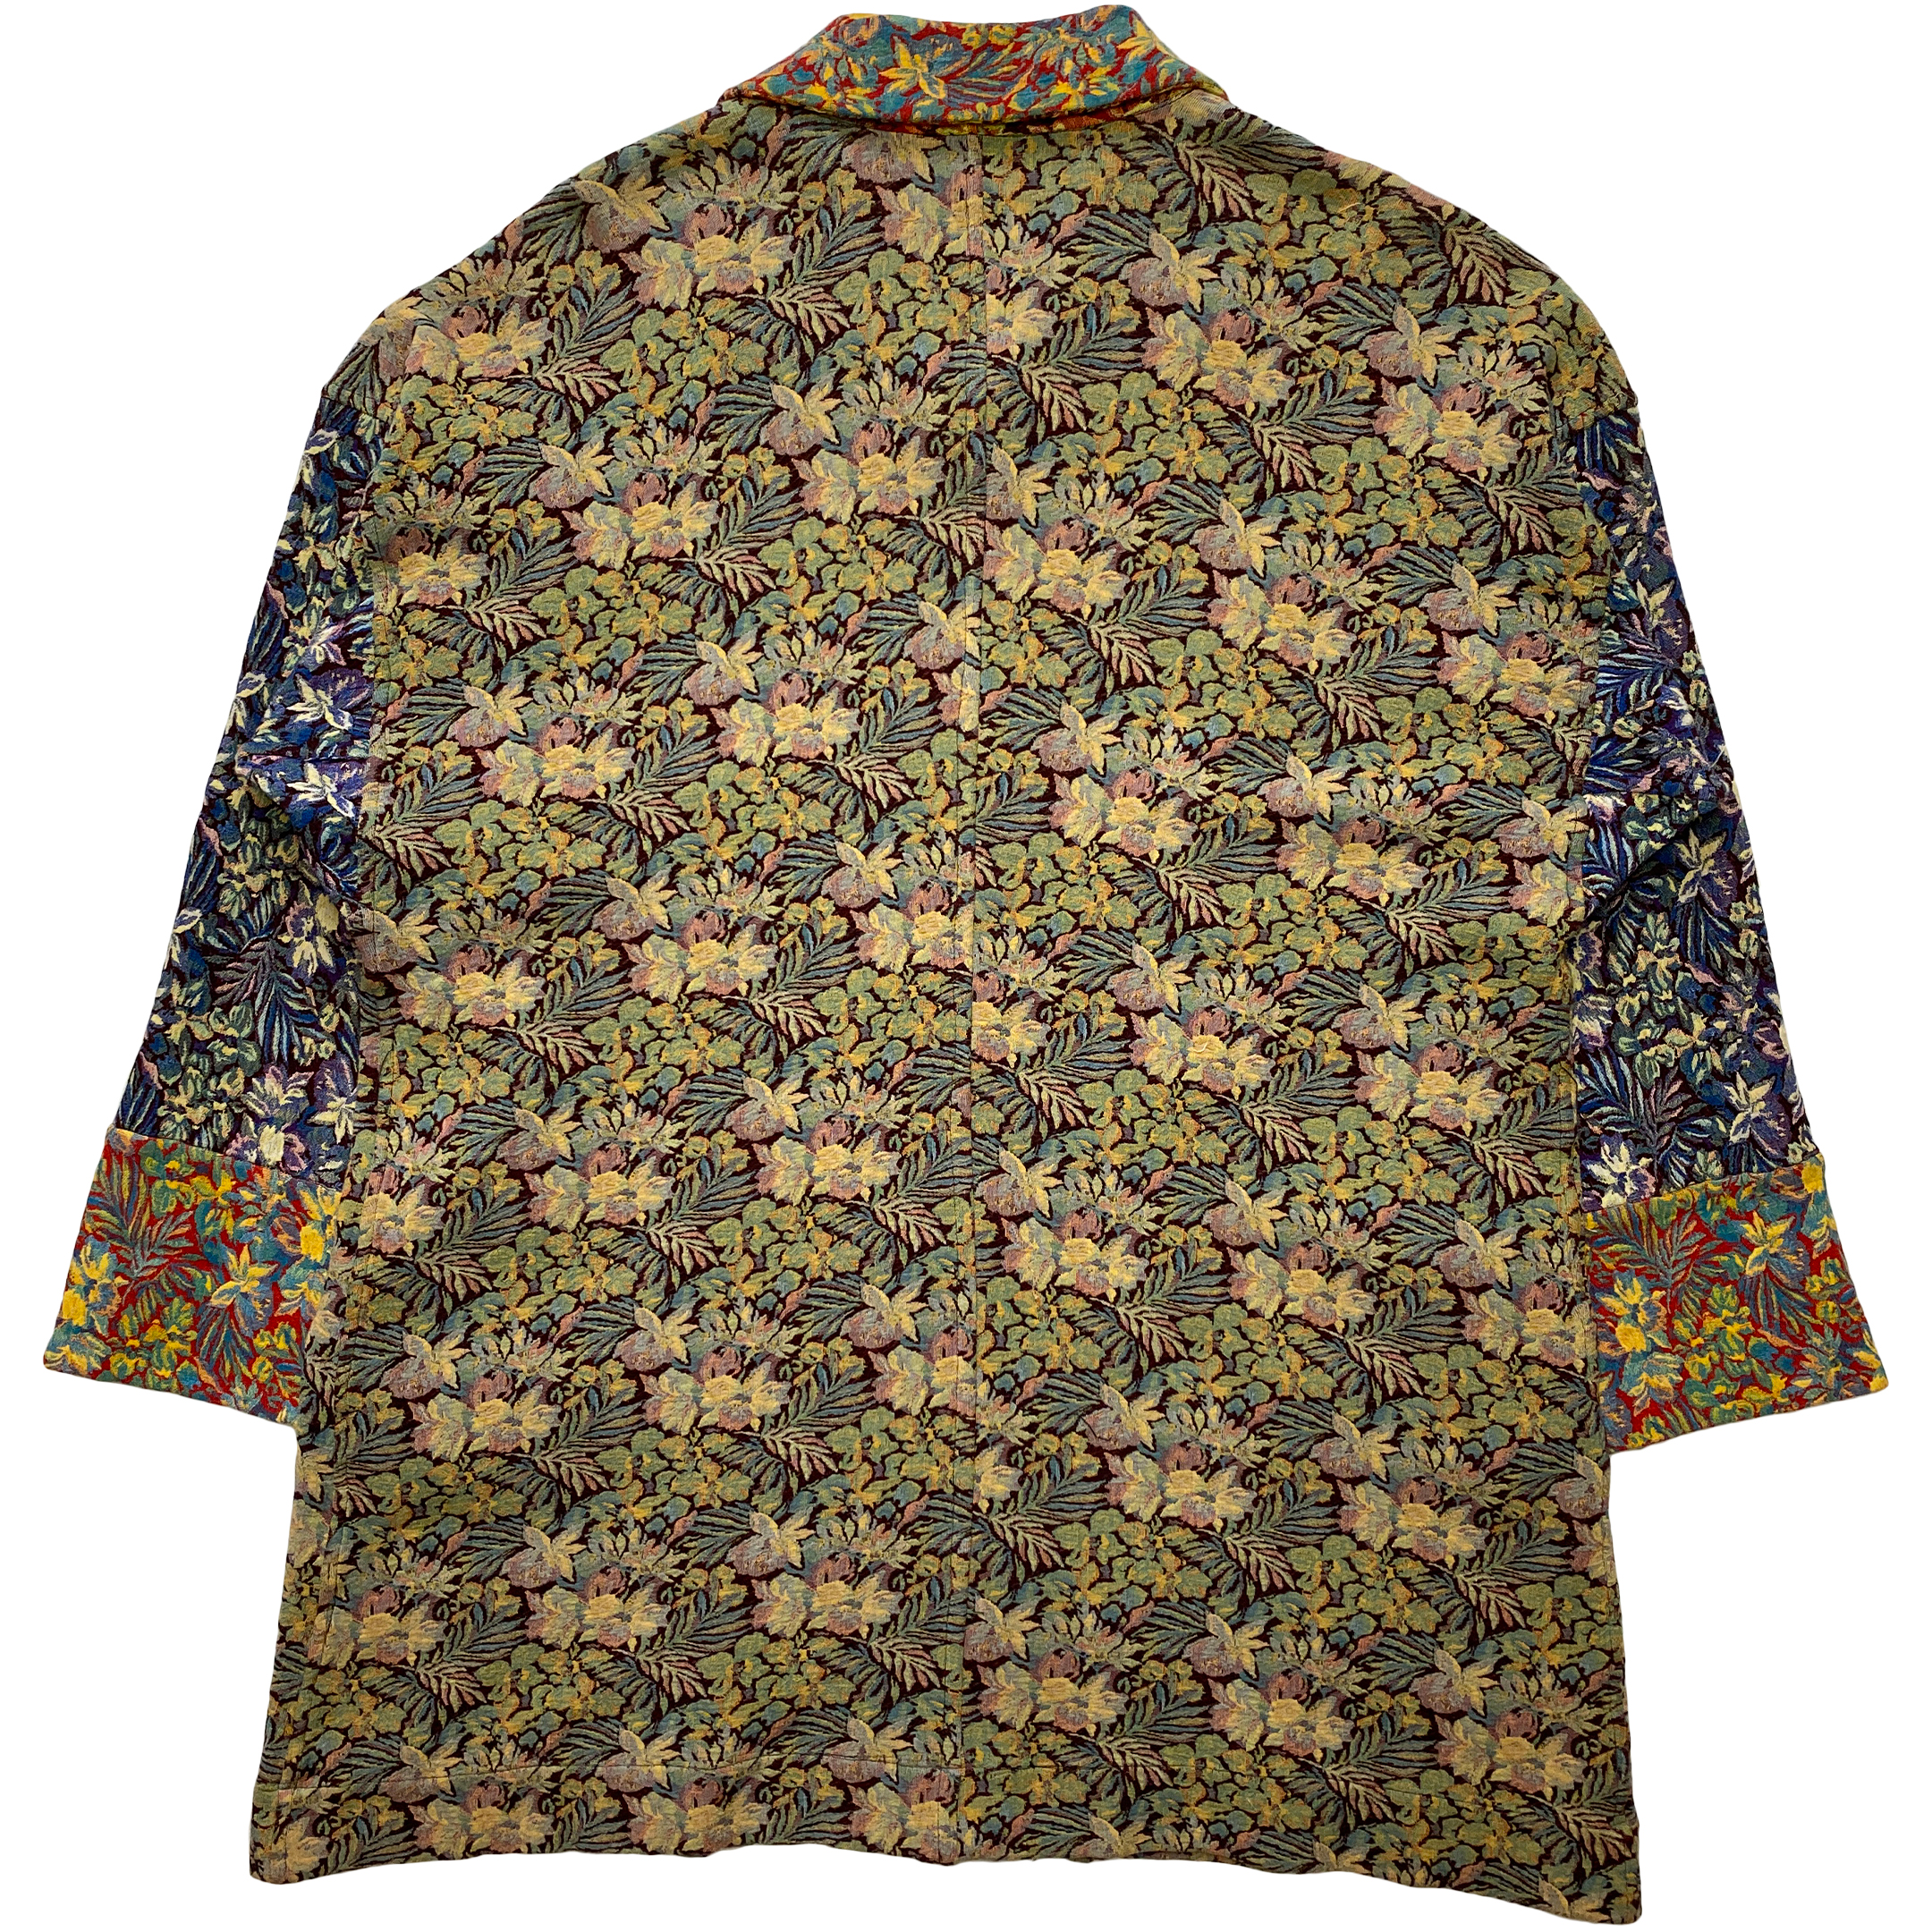 Issey Miyake, A/W 1994 Patchwork Embroidered Floral Chore Jacket